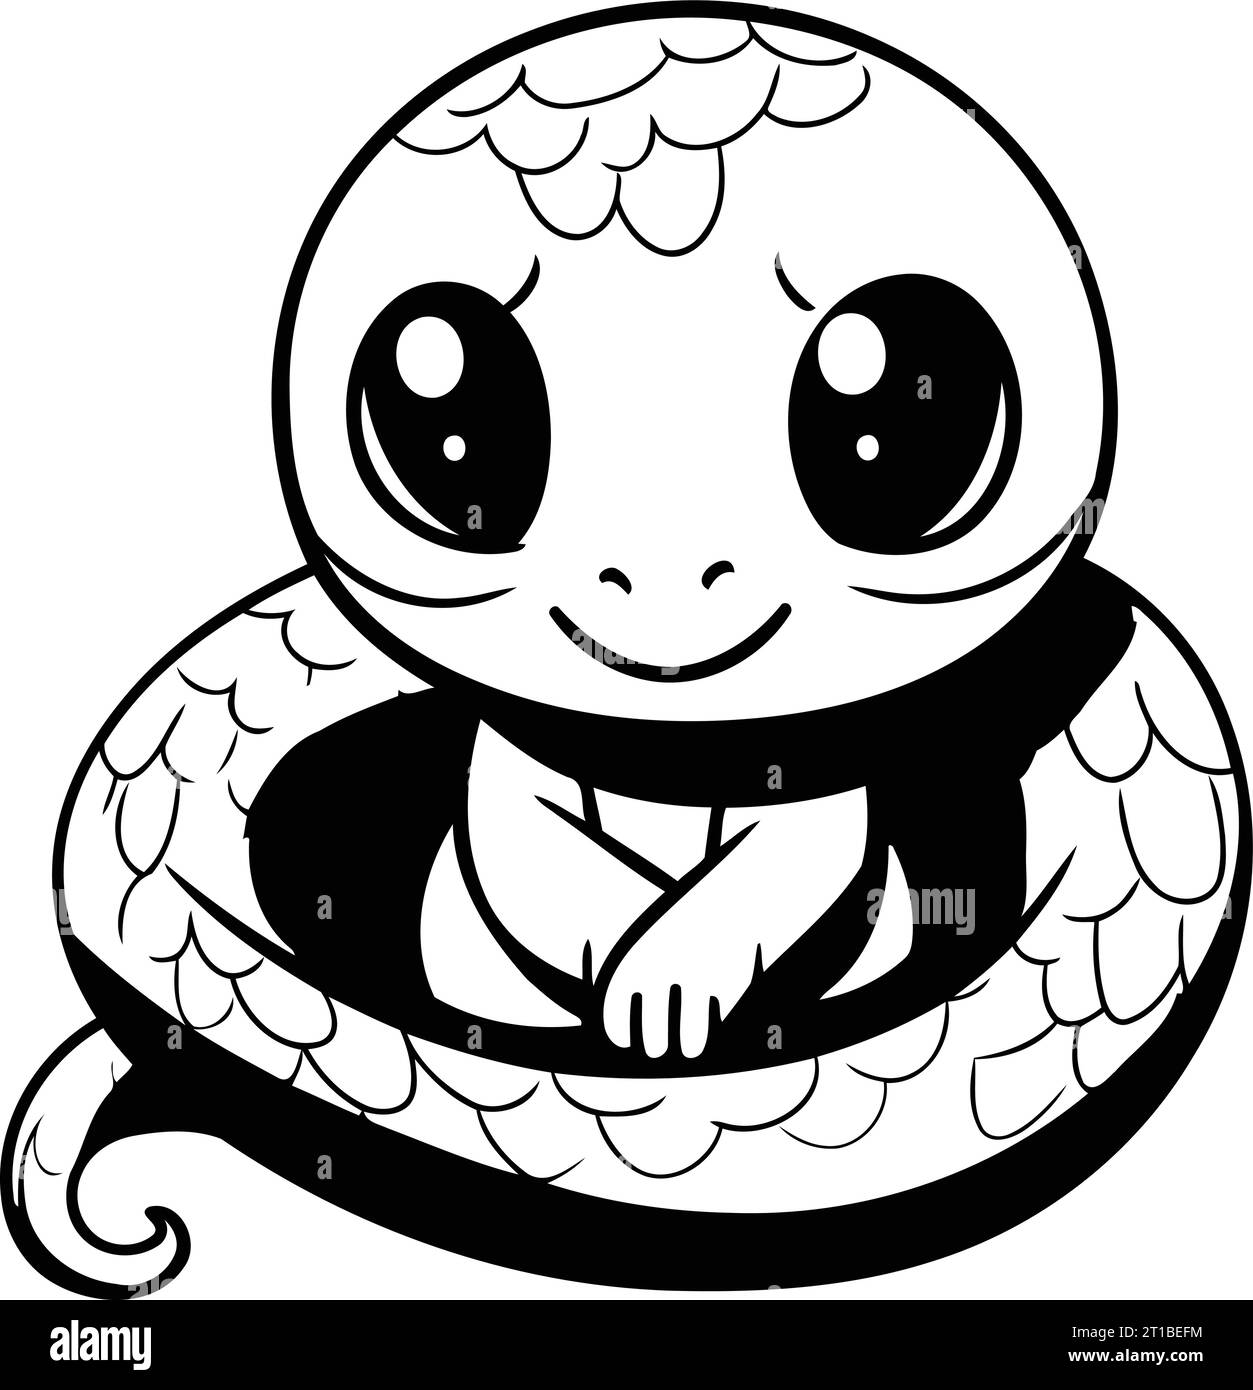 Cute baby snake. Vector illustration for coloring book or page. Stock Vector